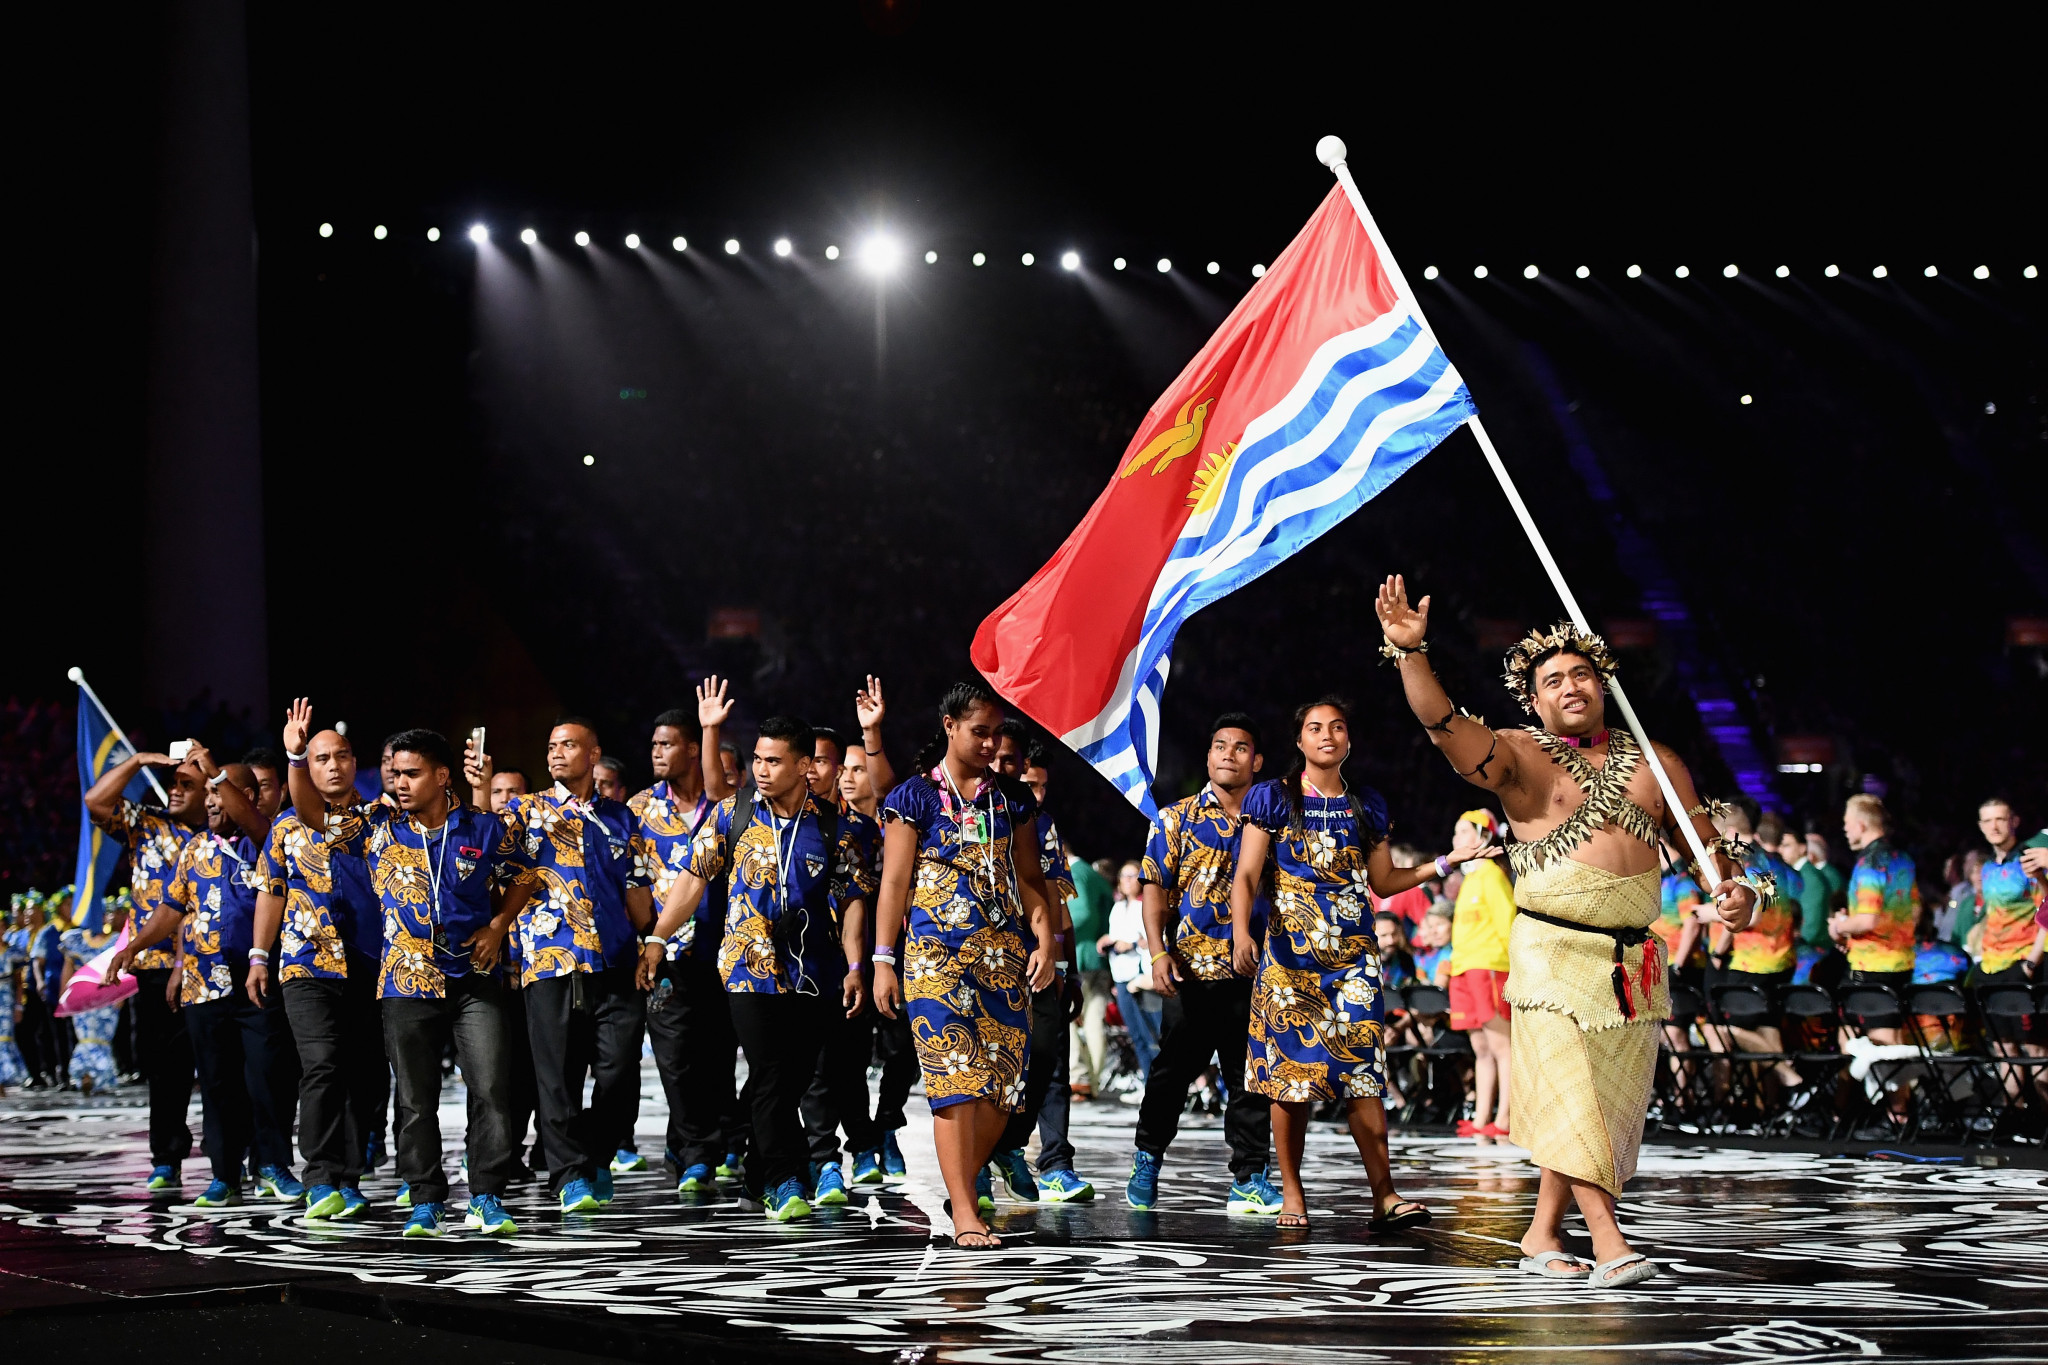 Kiribati is among 11 Pacific Island nations set to benefit from Commonwealth Games Australia's partnership with the Australian Government ©Getty Images